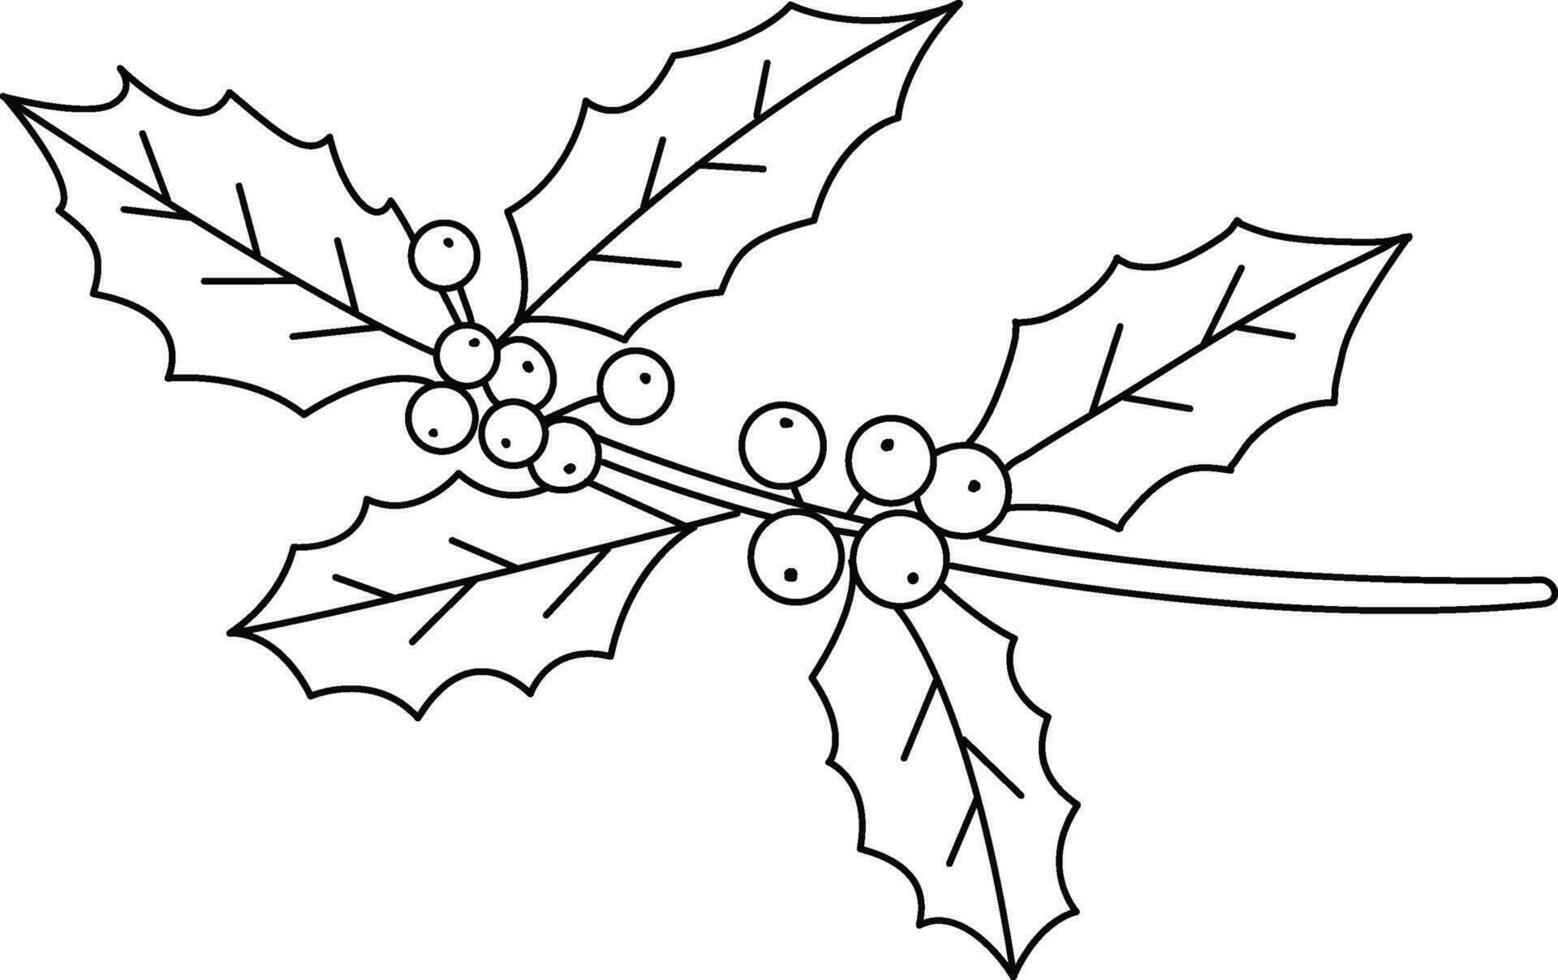 doodle simple, cute hand-drawn Holly pattern, The Holly design used decorate Christmas cards, invitations, wreaths. beautiful  Holly leaves and berries. vector